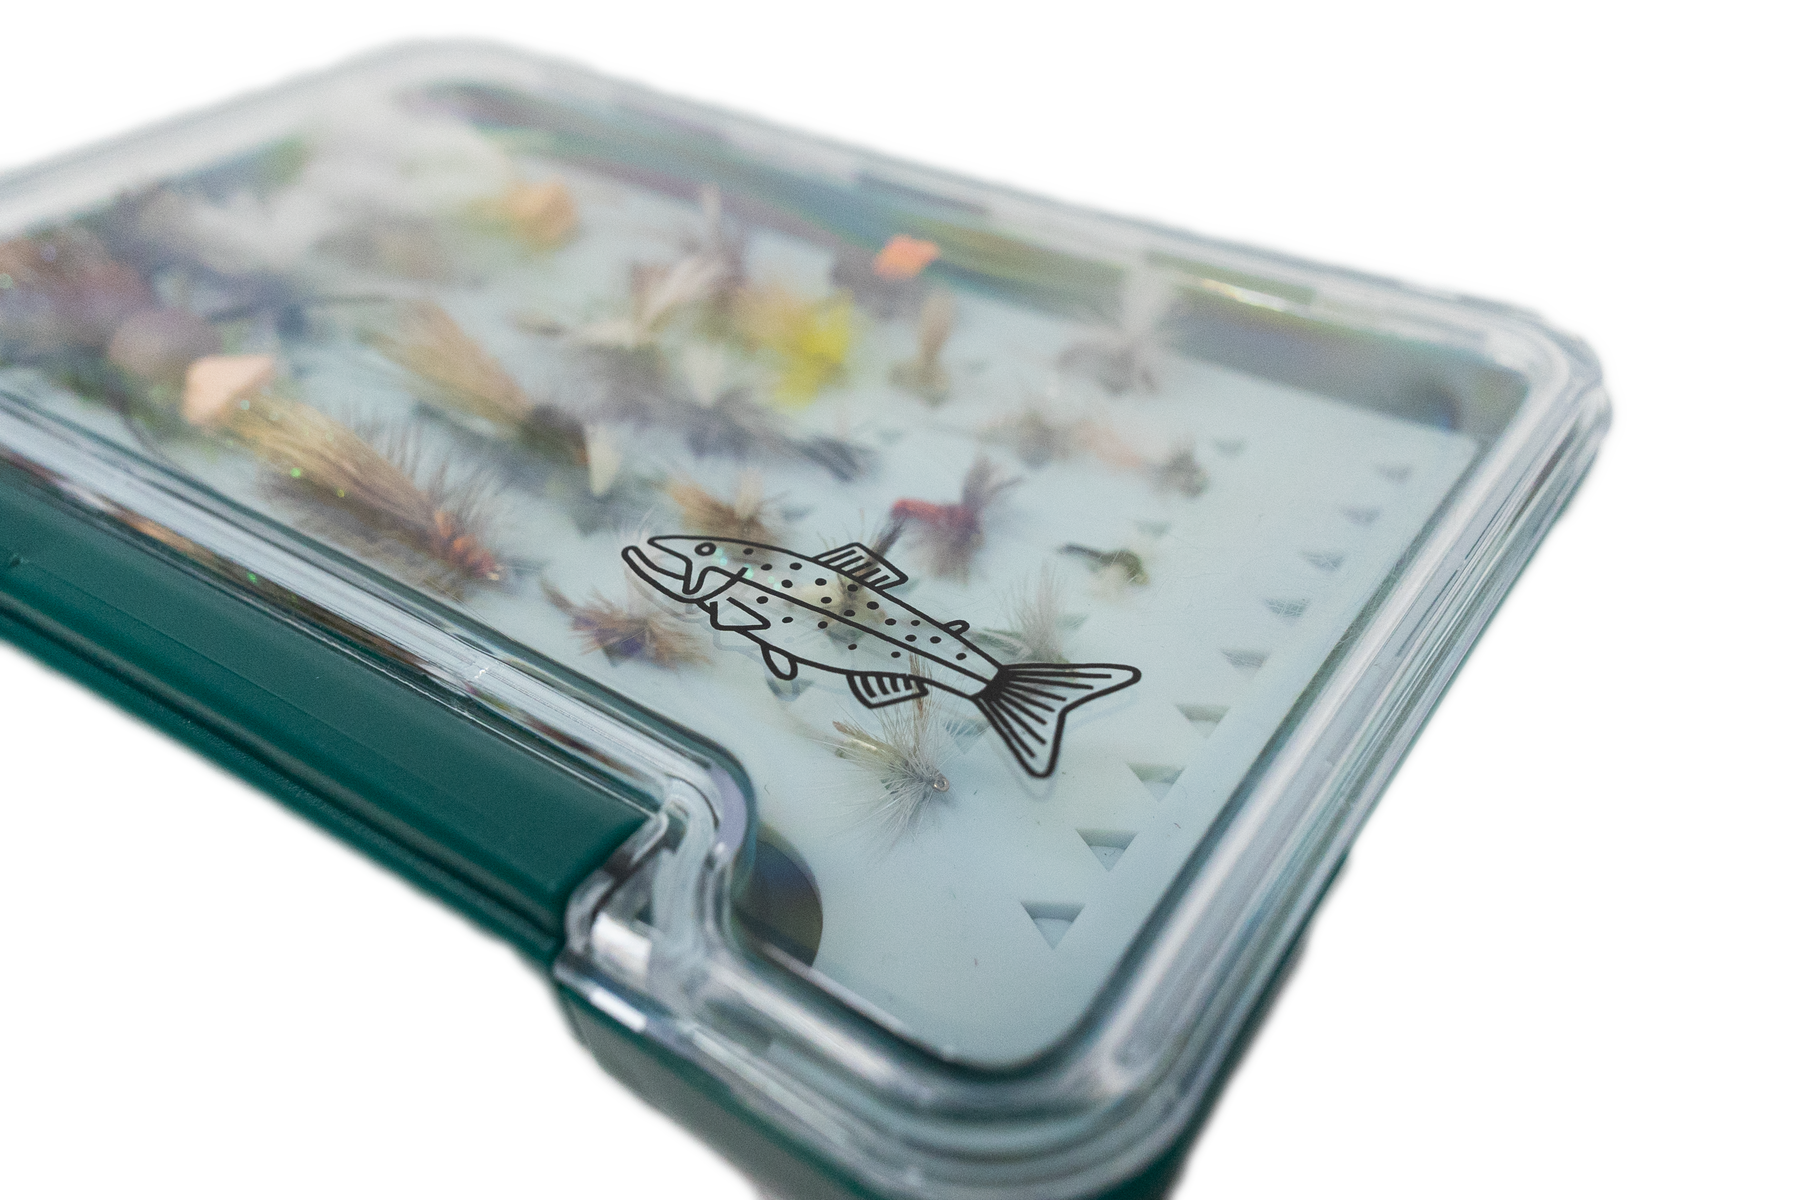 Loaded Fly Box with 24 Dry Flies